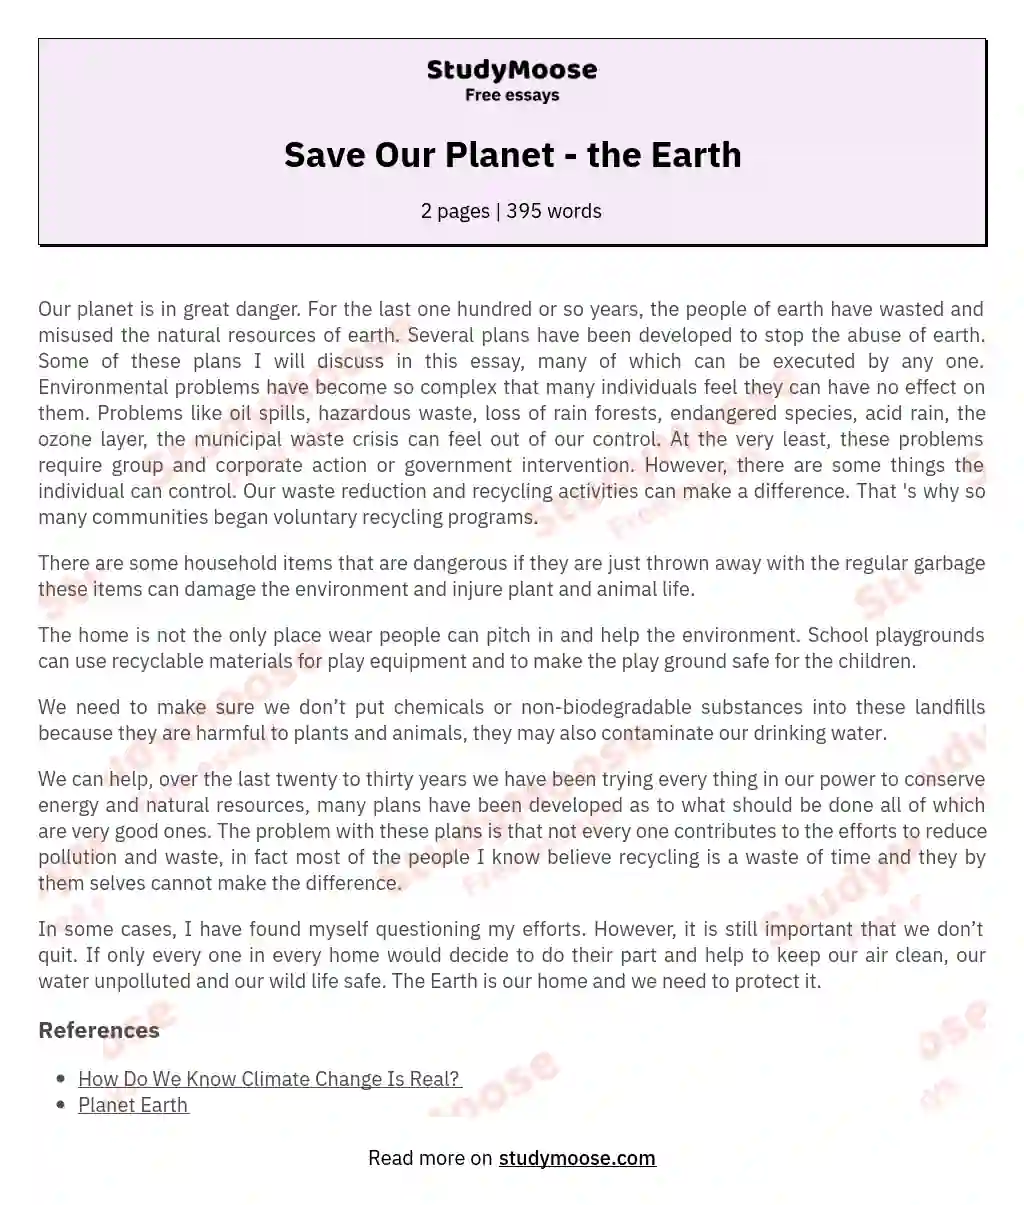 Save Our Planet - the Earth essay